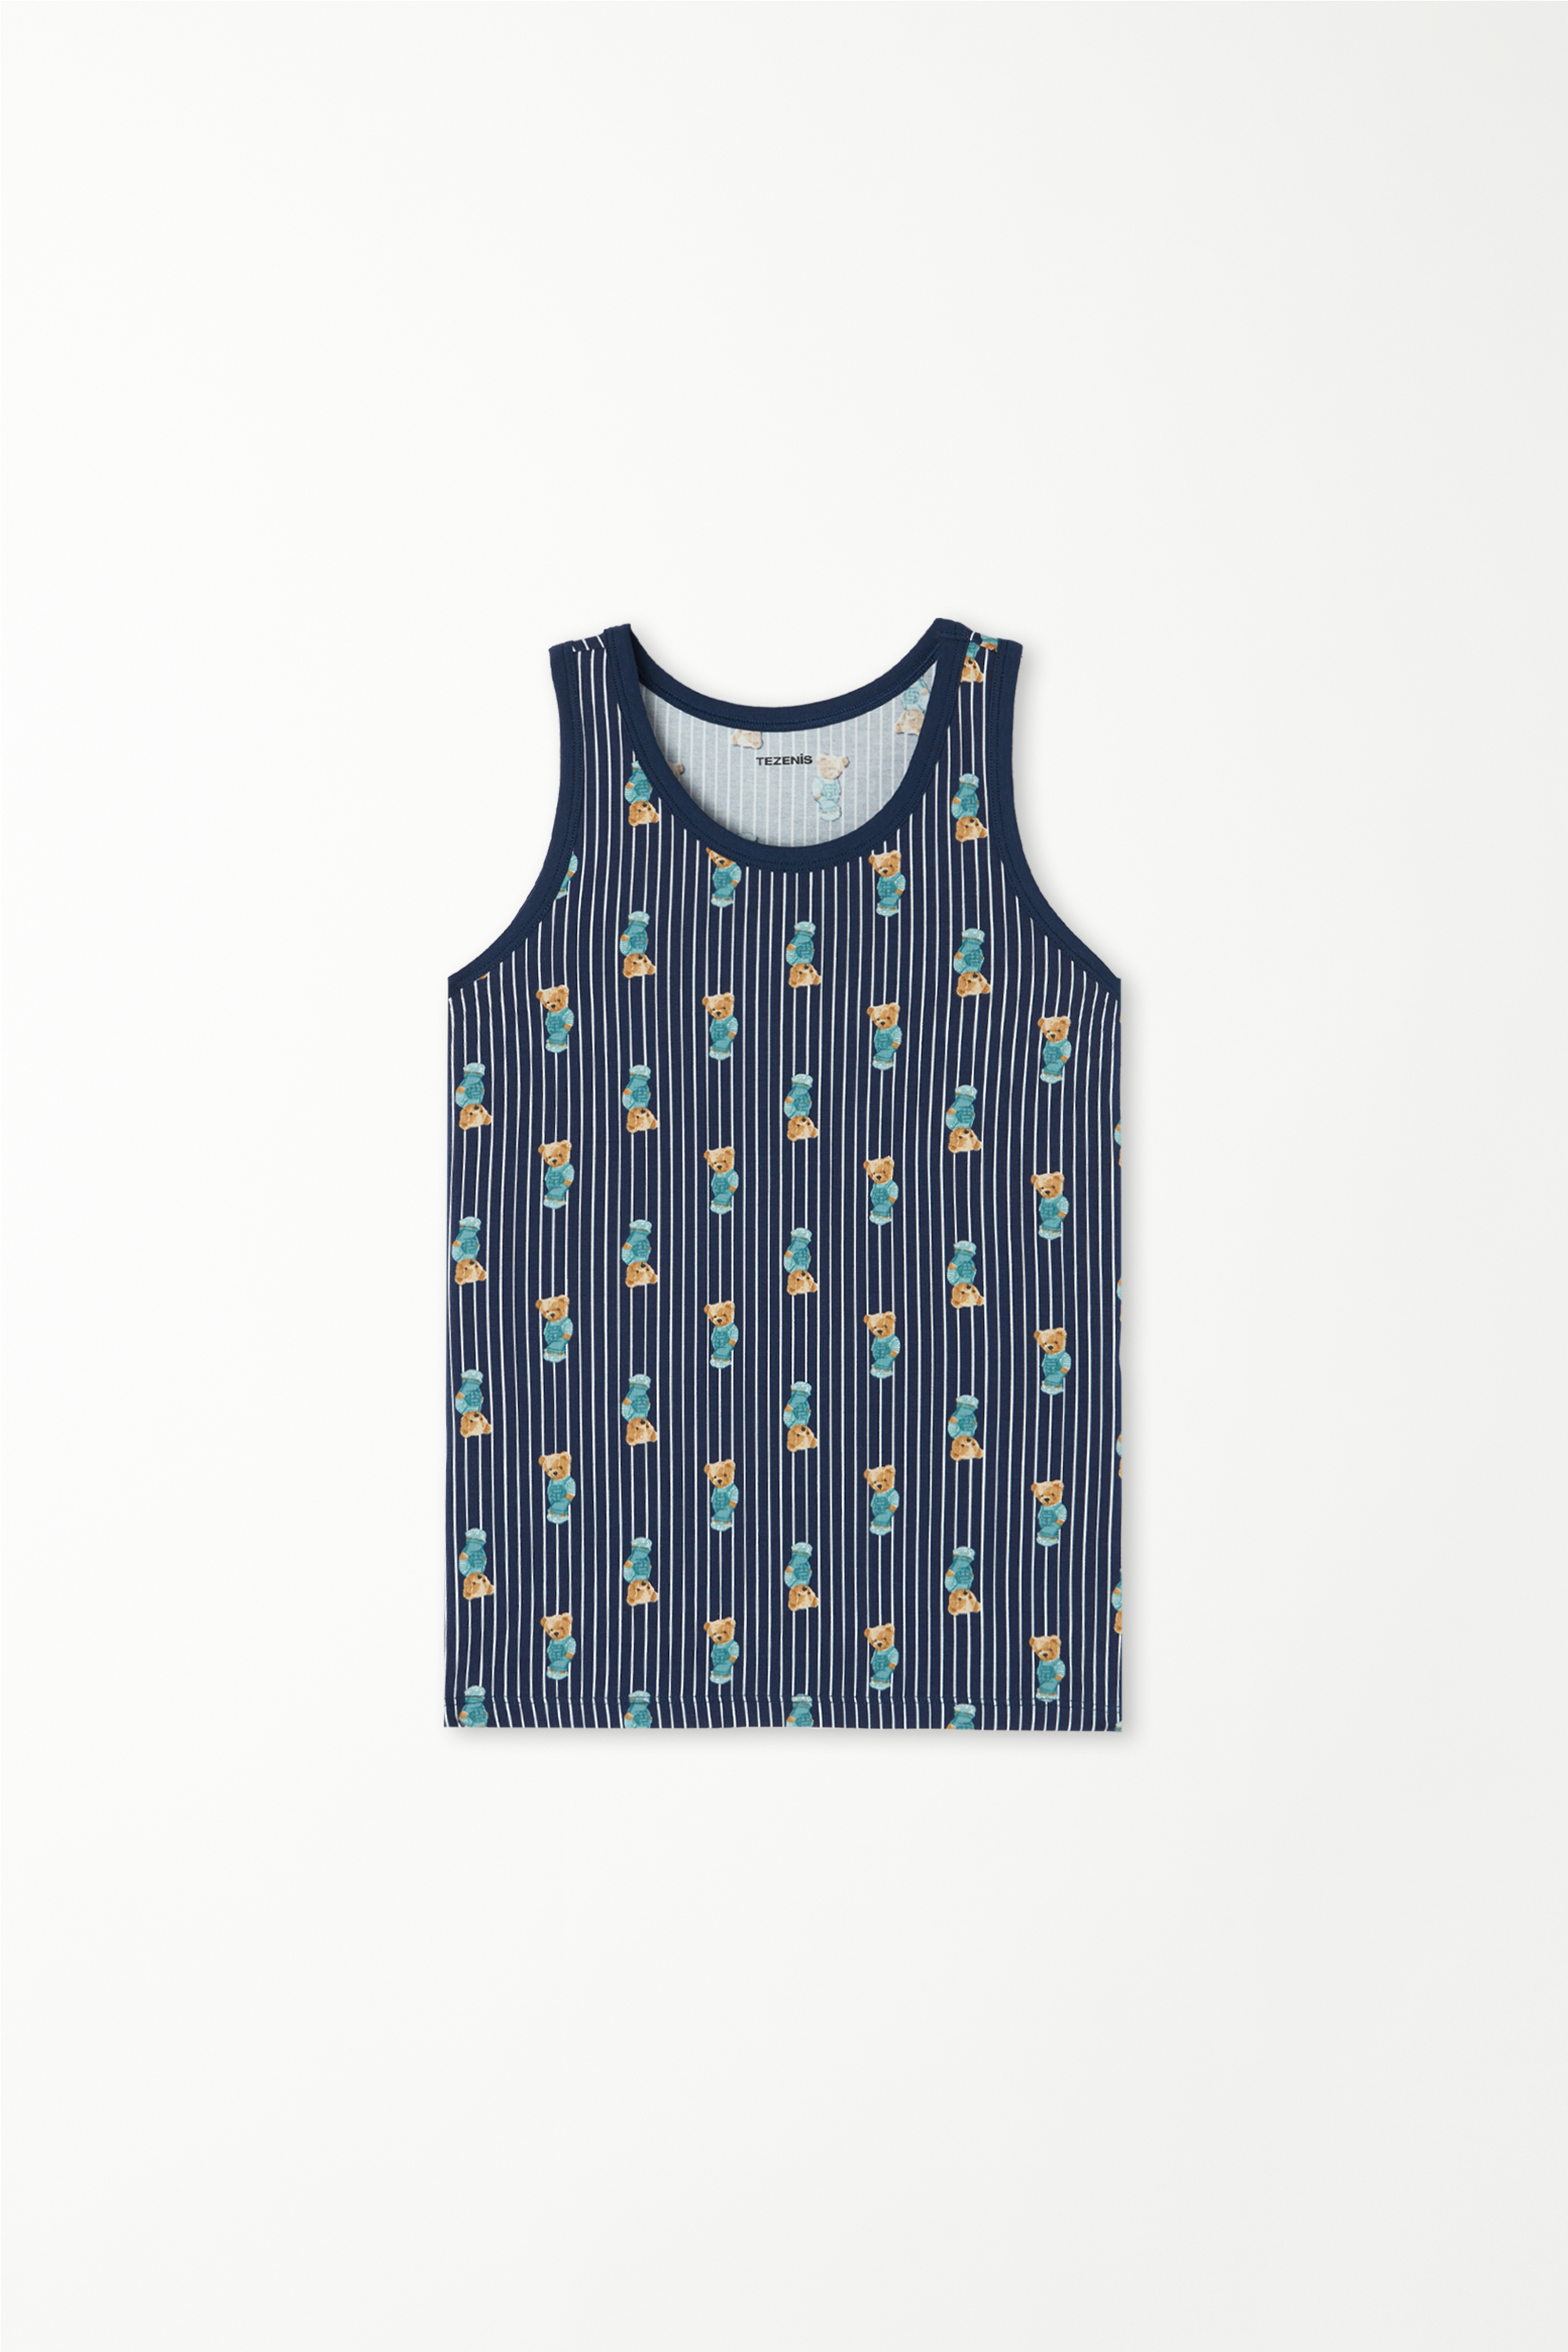 Unisex Kids' Printed Cotton Camisole with Wide Shoulder Straps